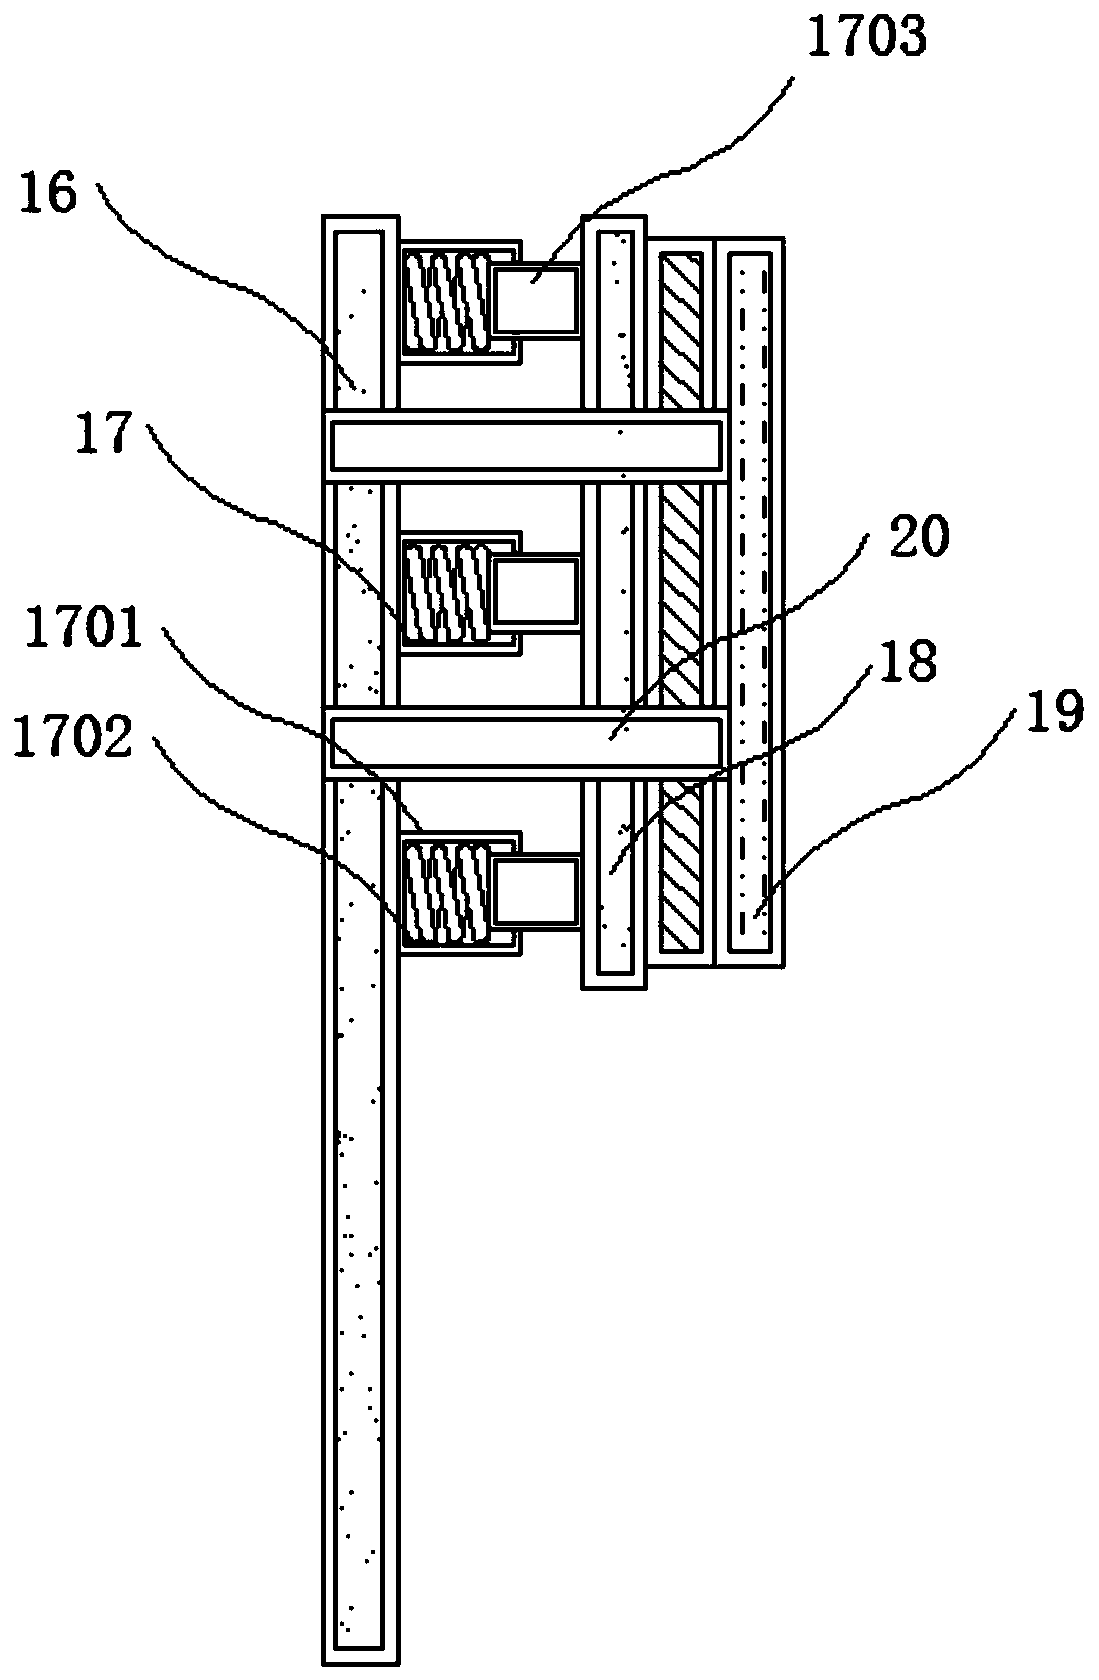 Domestic garbage crushing device with separating structure